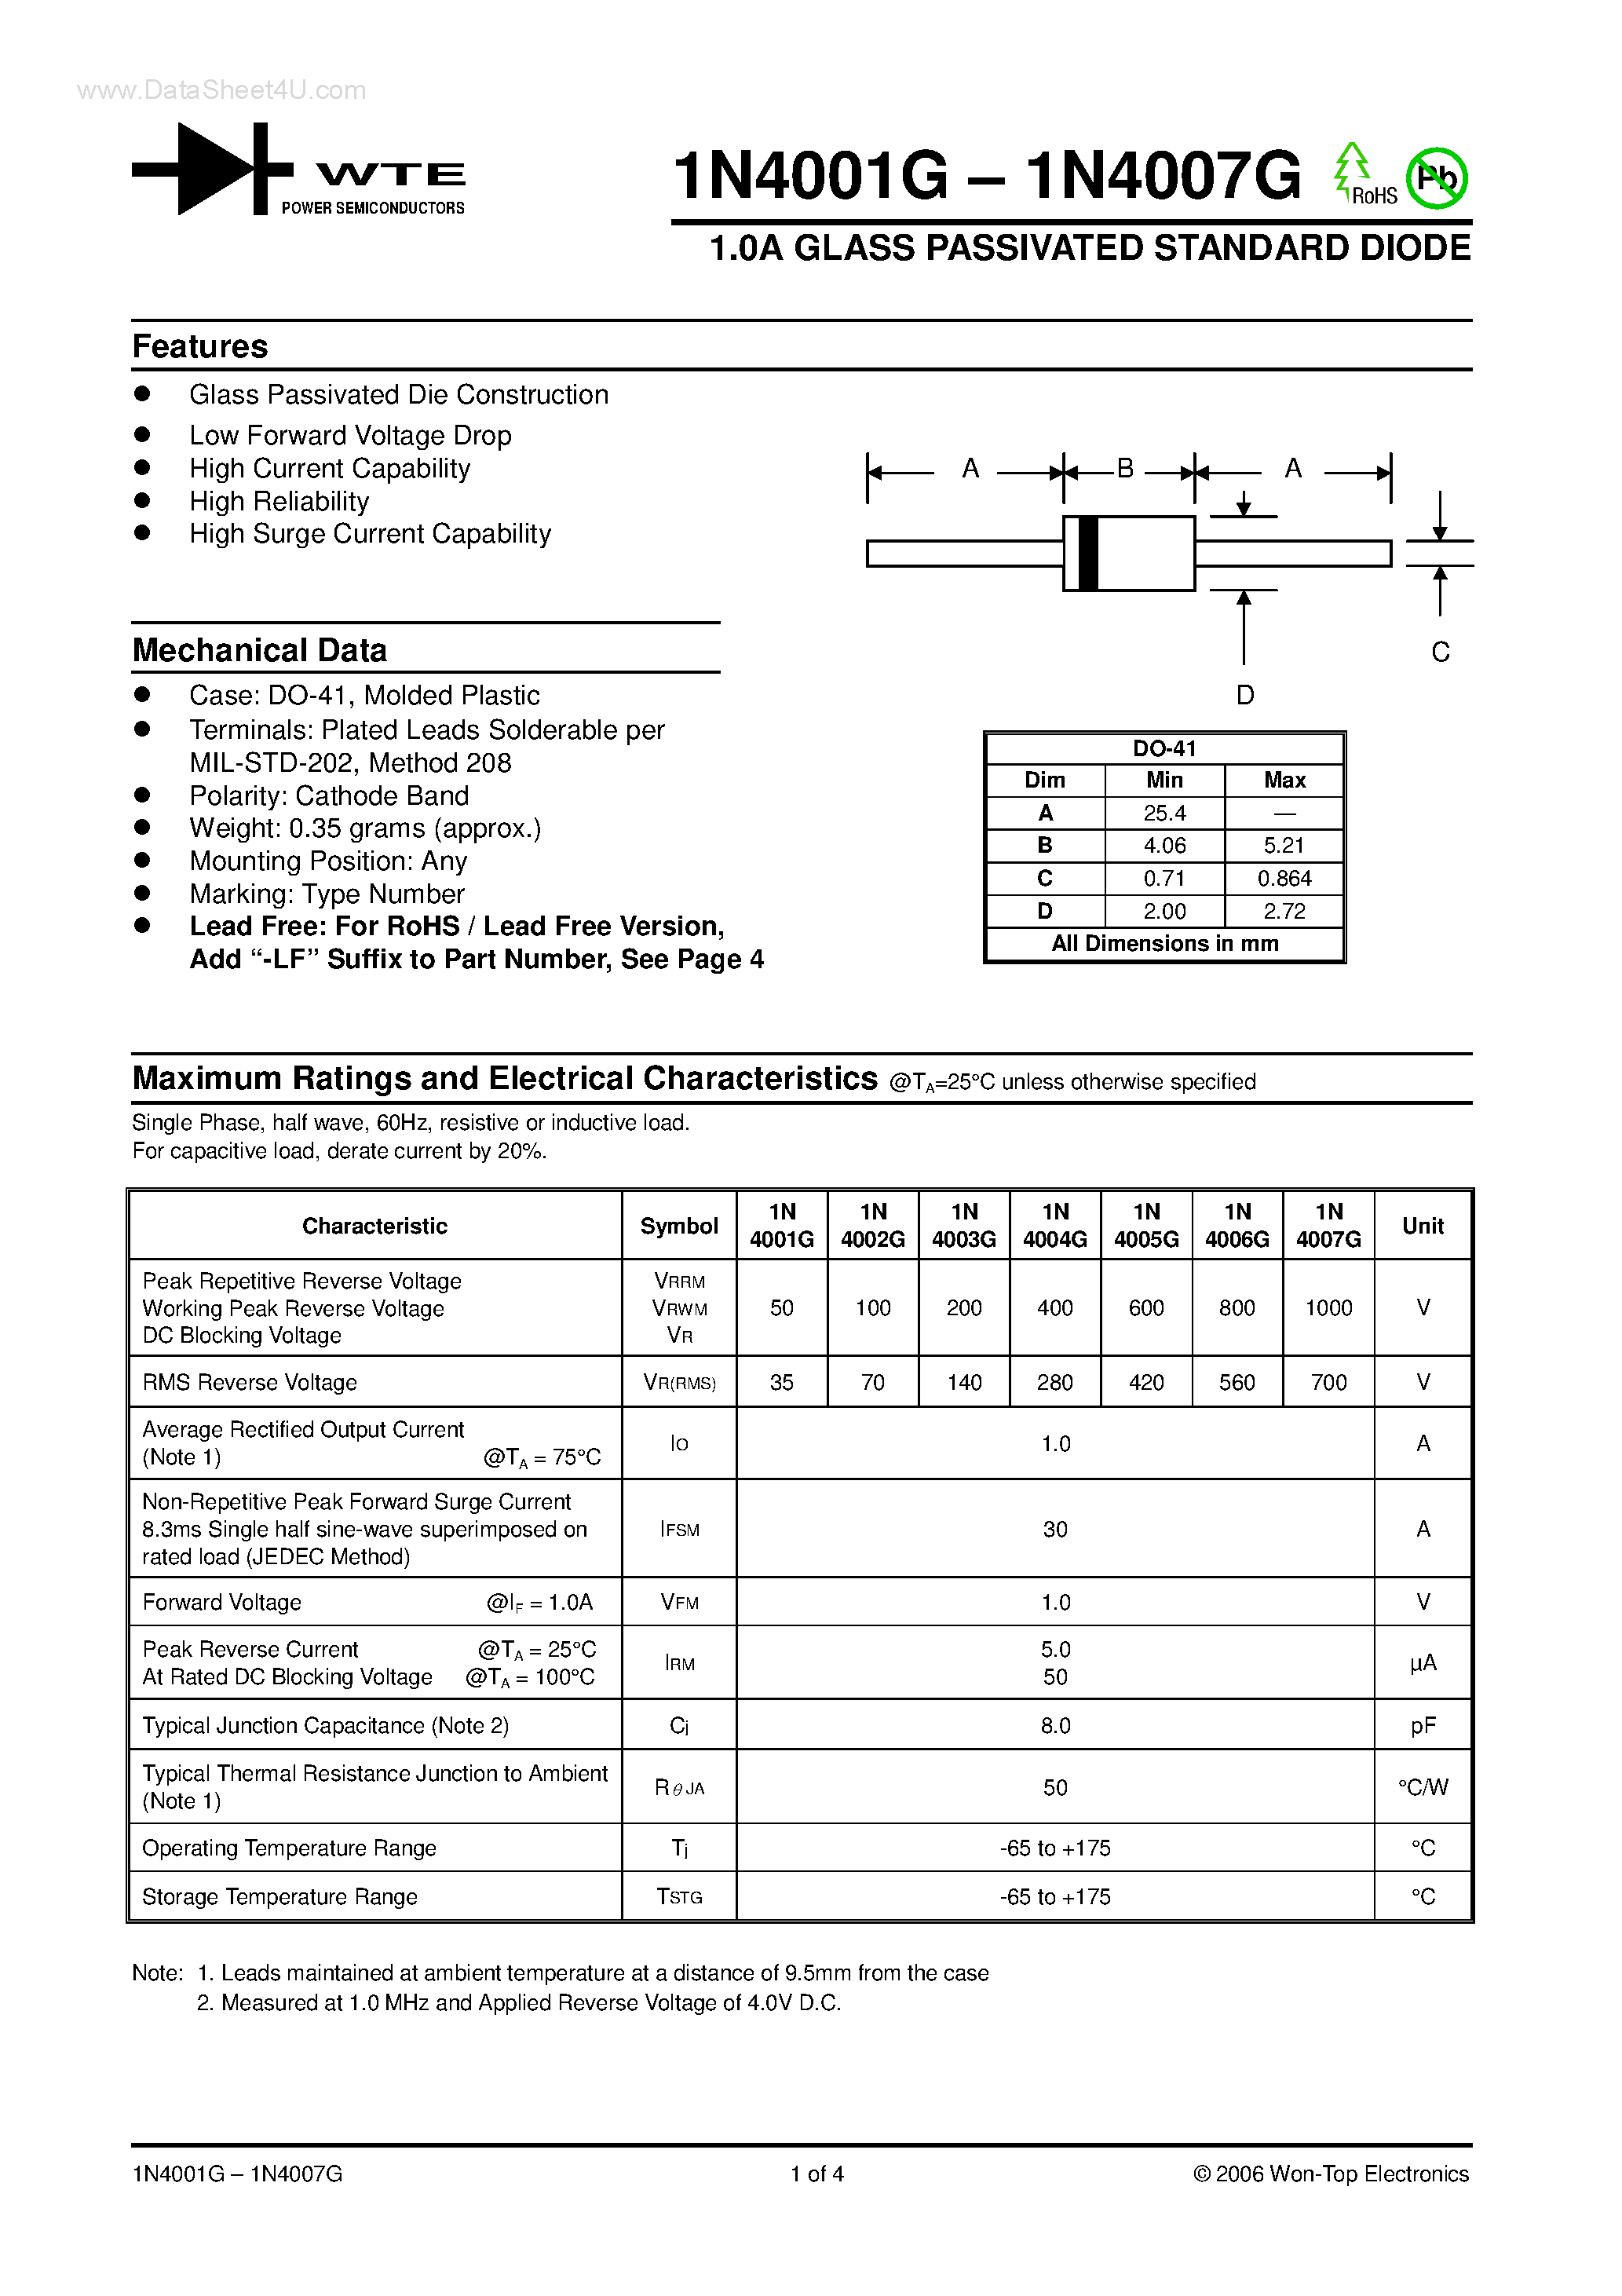 Datasheet 1N4001G - (1N4001G - 1N4007G) 1.0A GLASS PASSIVATED STANDARD DIODE page 1